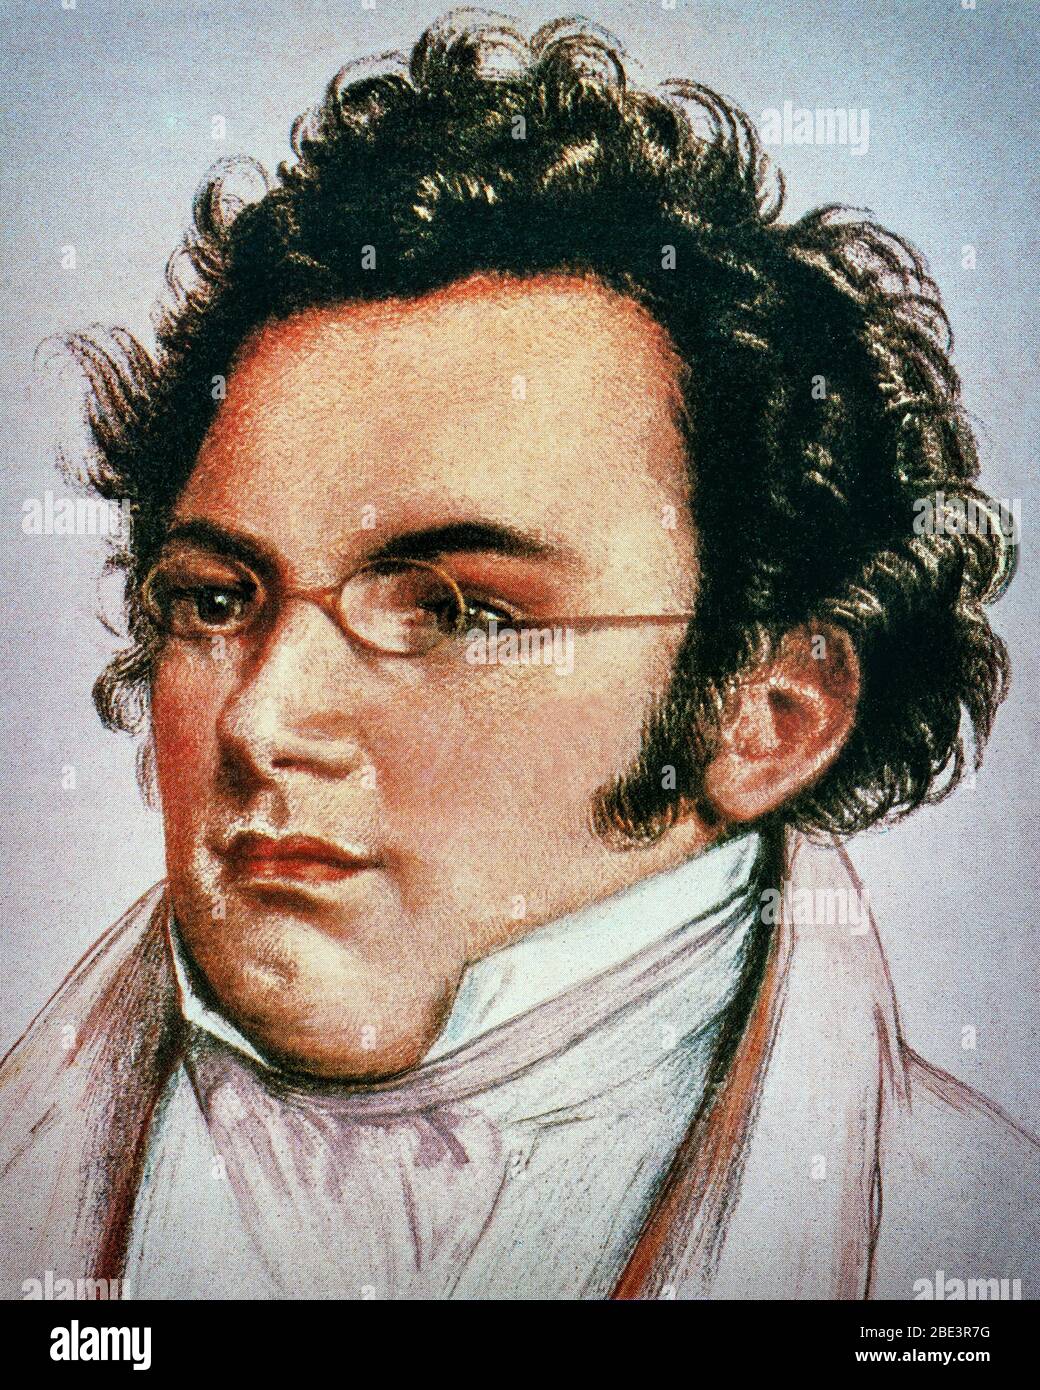 A portrait of Franz Peter Schubert (1797-1828) was an Austrian composer of the late Classical and early Romantic eras. Despite his short lifetime, Schubert left behind more than 600 secular vocal works, seven complete symphonies, sacred music, operas, incidental music and a large body of piano and chamber music. (artist unknown) Stock Photo